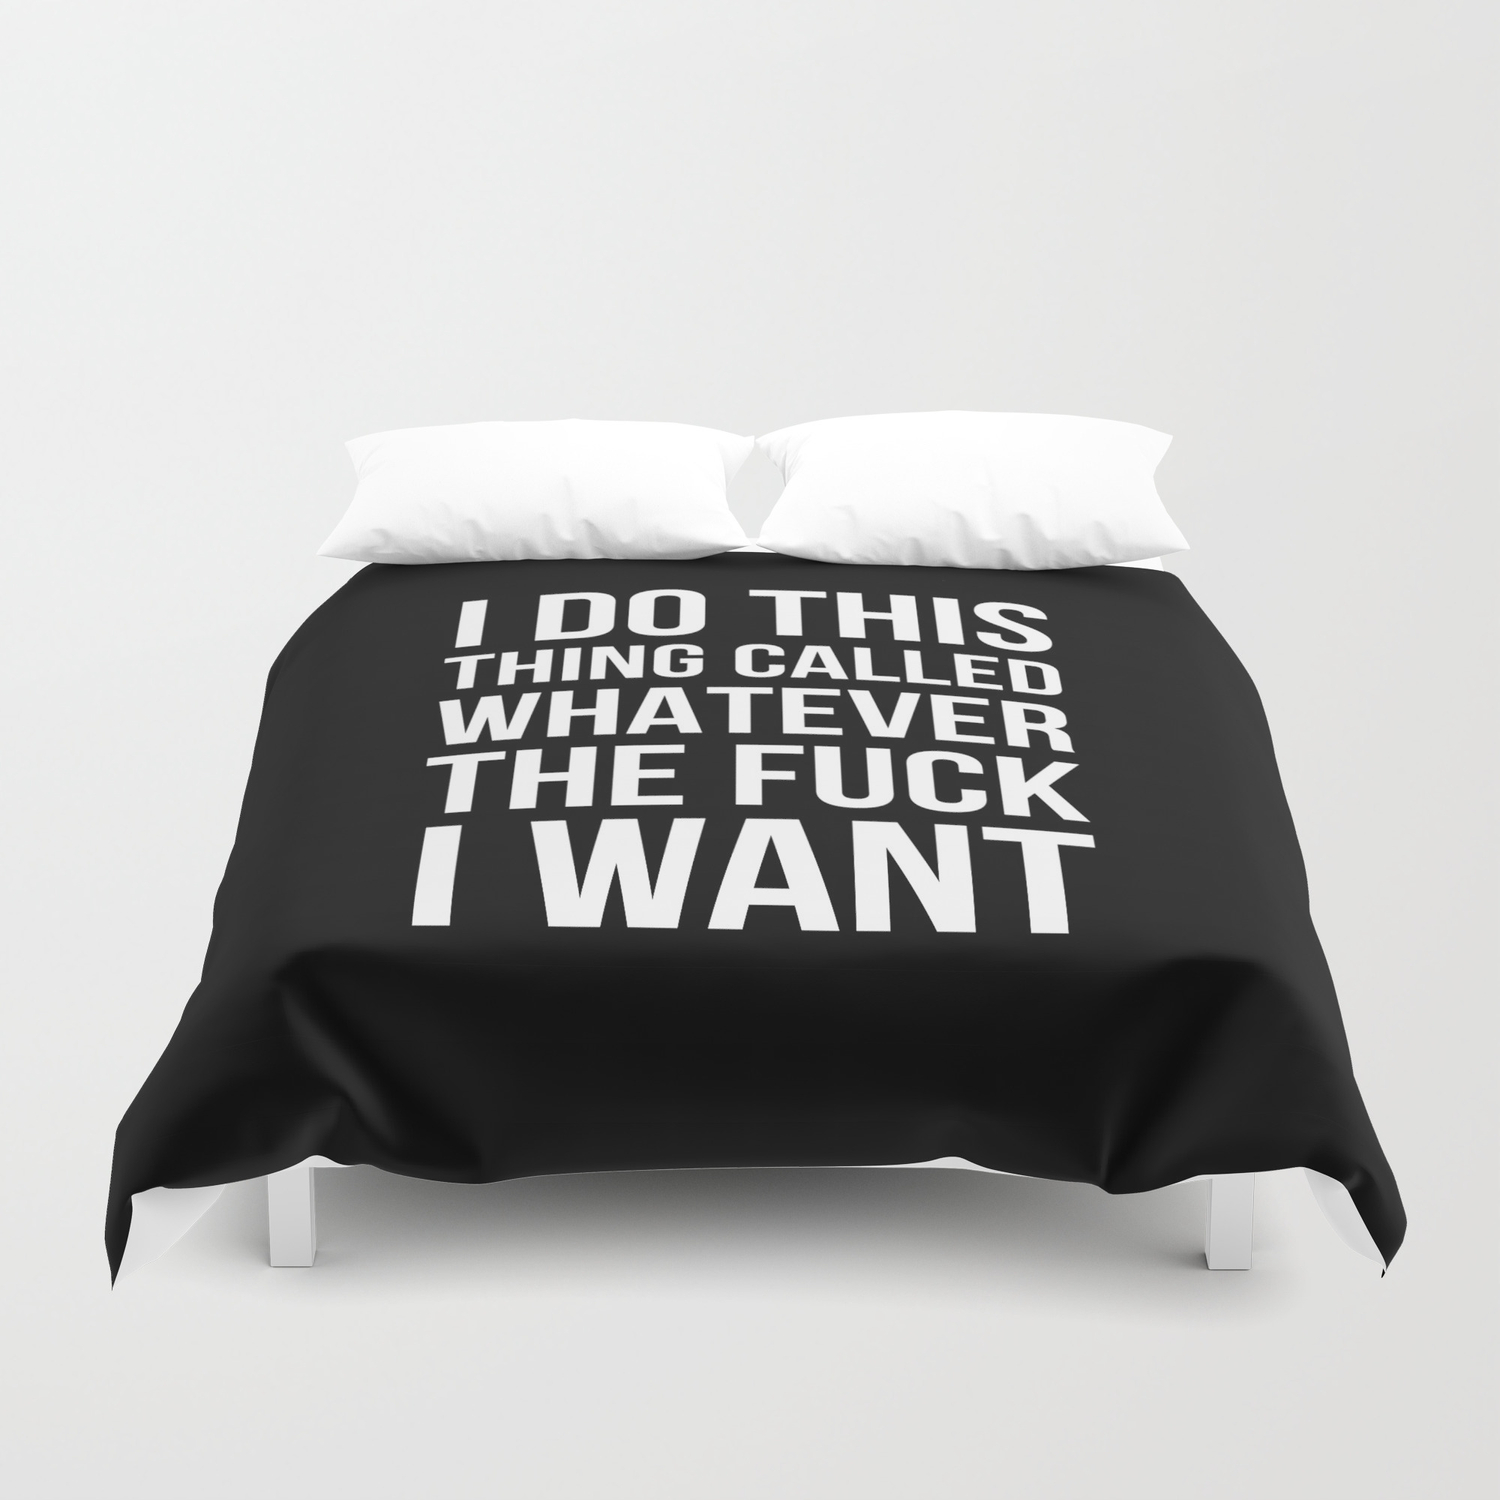 I Do This Thing Called Whatever The Fuck I Want Black Duvet